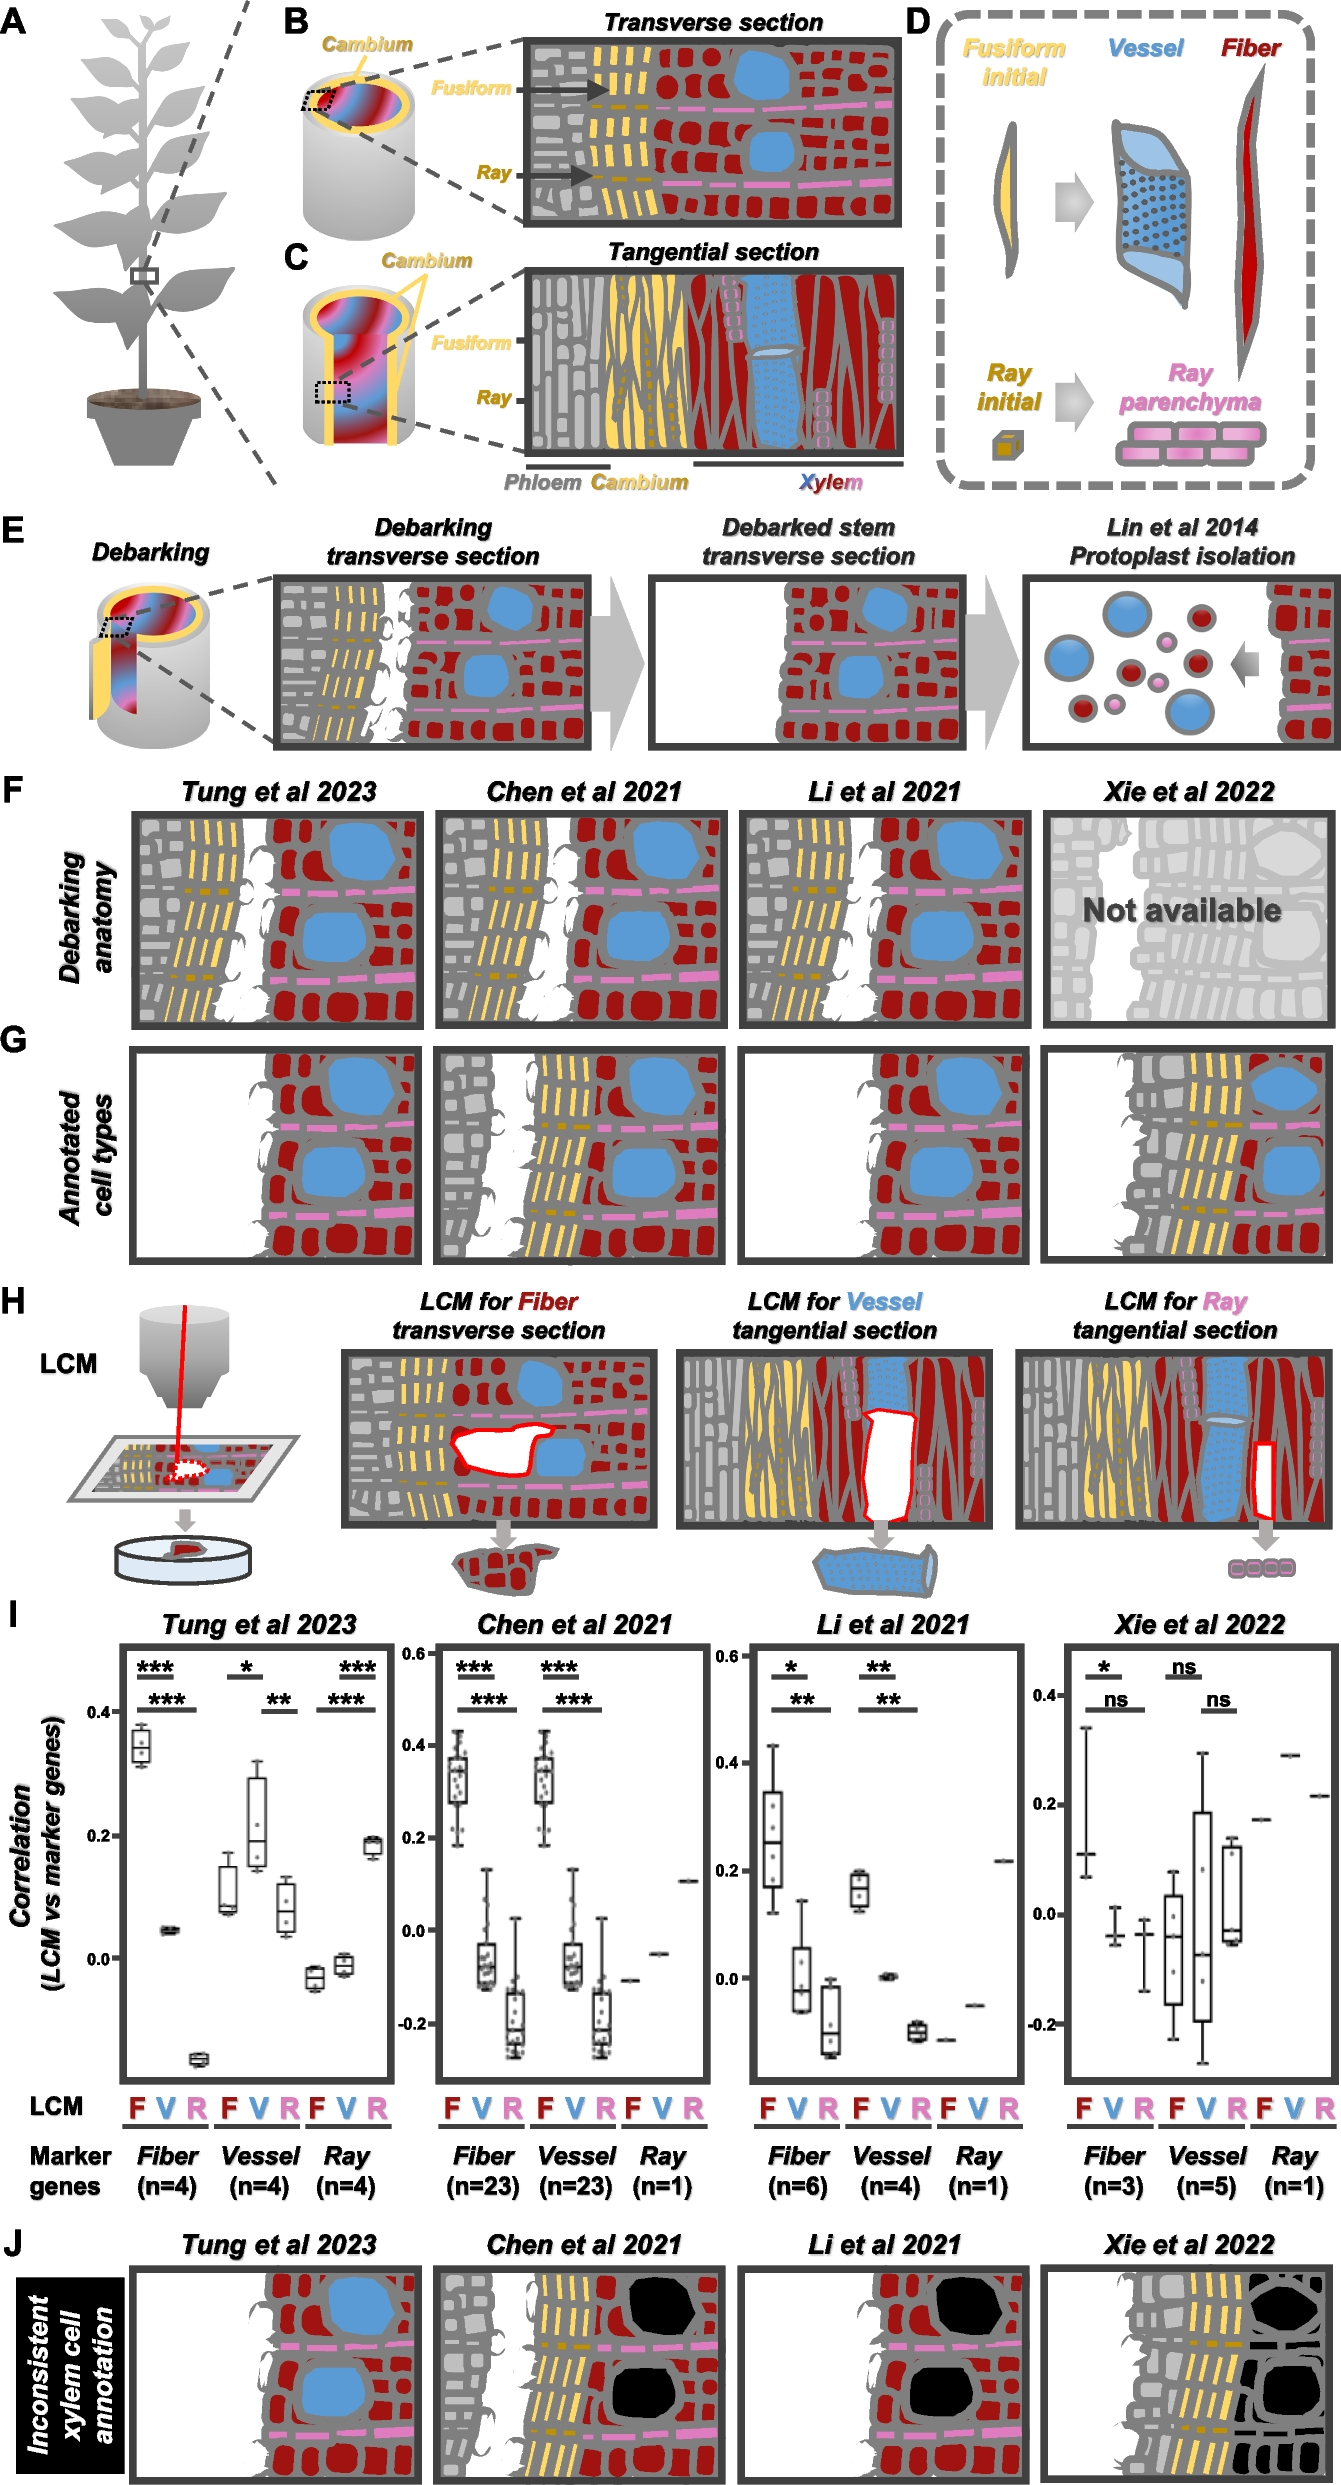 Merit of integrating in situ transcriptomics and anatomical information for cell annotation and lineage construction in single-cell analyses of Populus